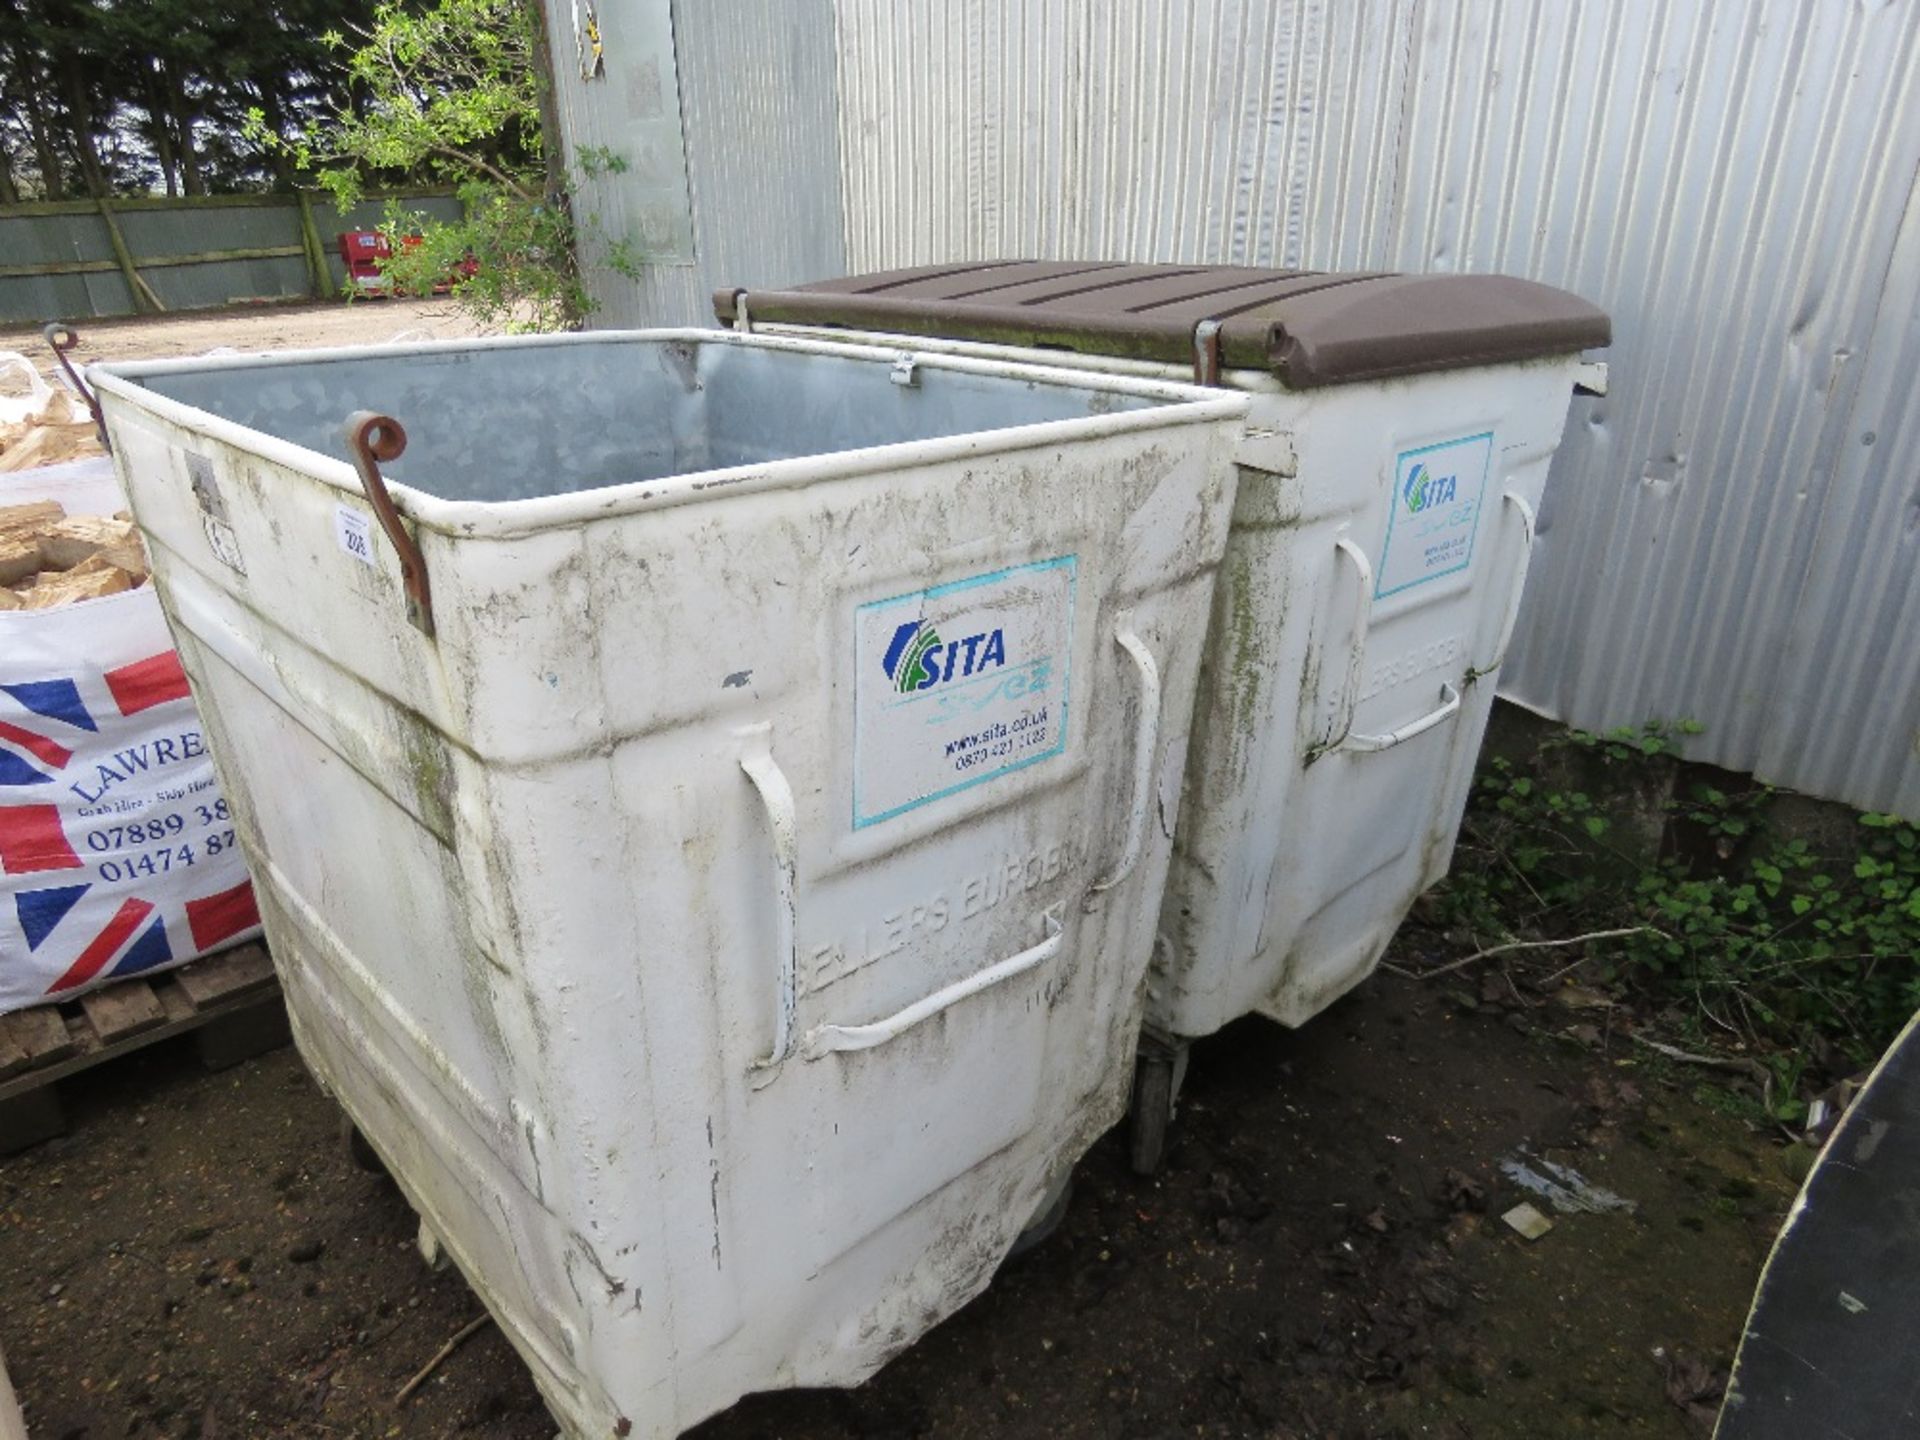 2 X SELLERS EUROBIN METAL WHEELED WASTE CONTAINER BINS.